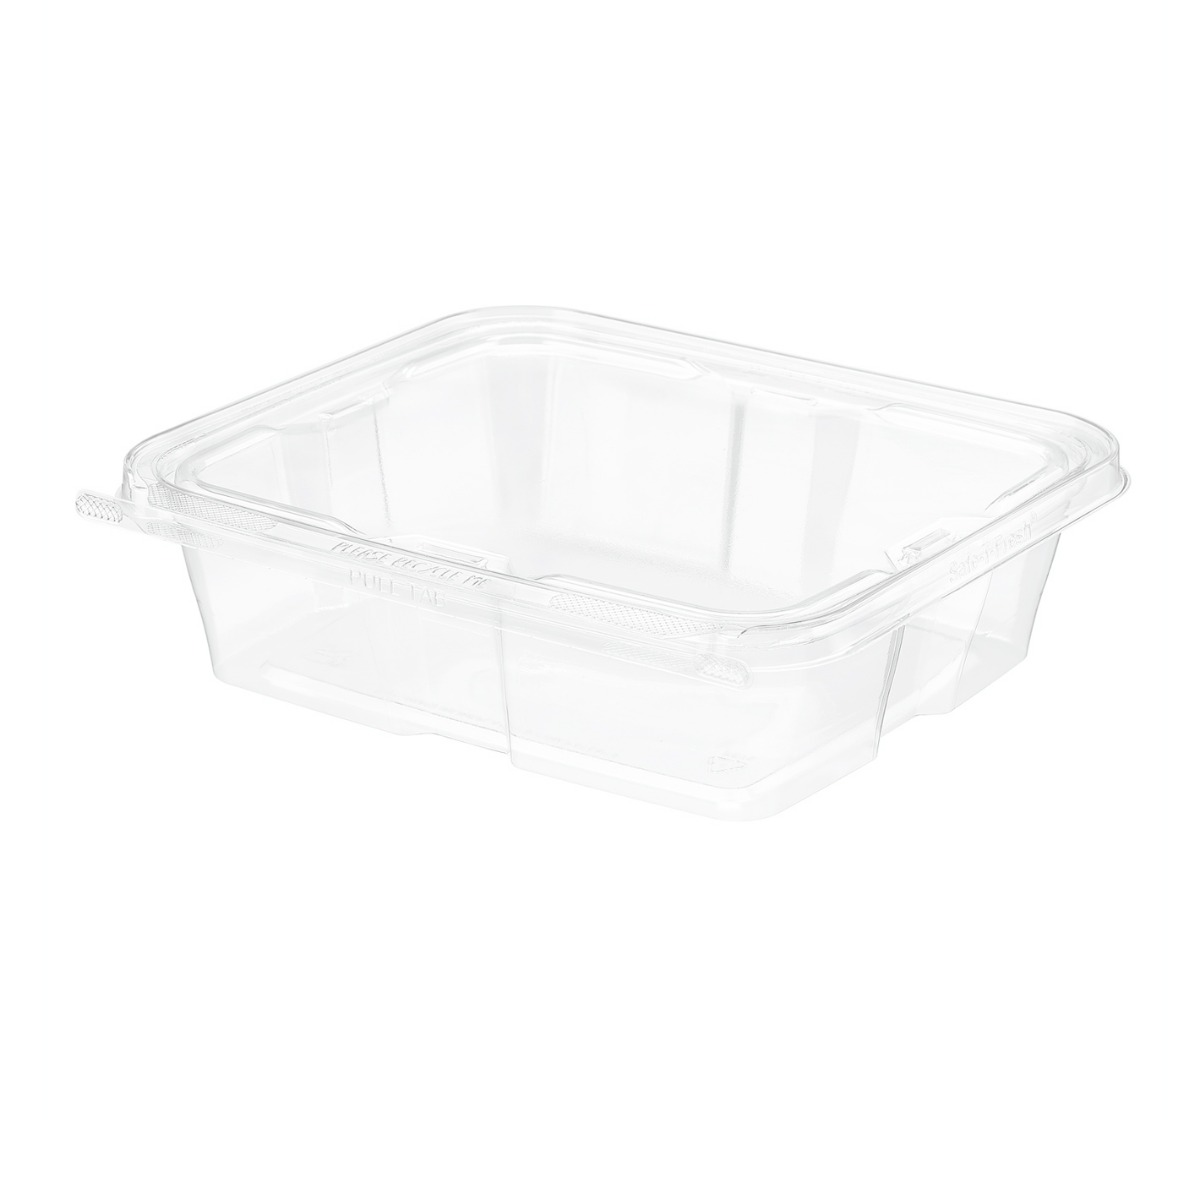 Tamper Tek 32 oz Rectangle Clear Plastic Container - with Hinged Lid,  Tamper-Evident - 6 1/2 x 4 1/2 x 2 1/2 - 100 count box